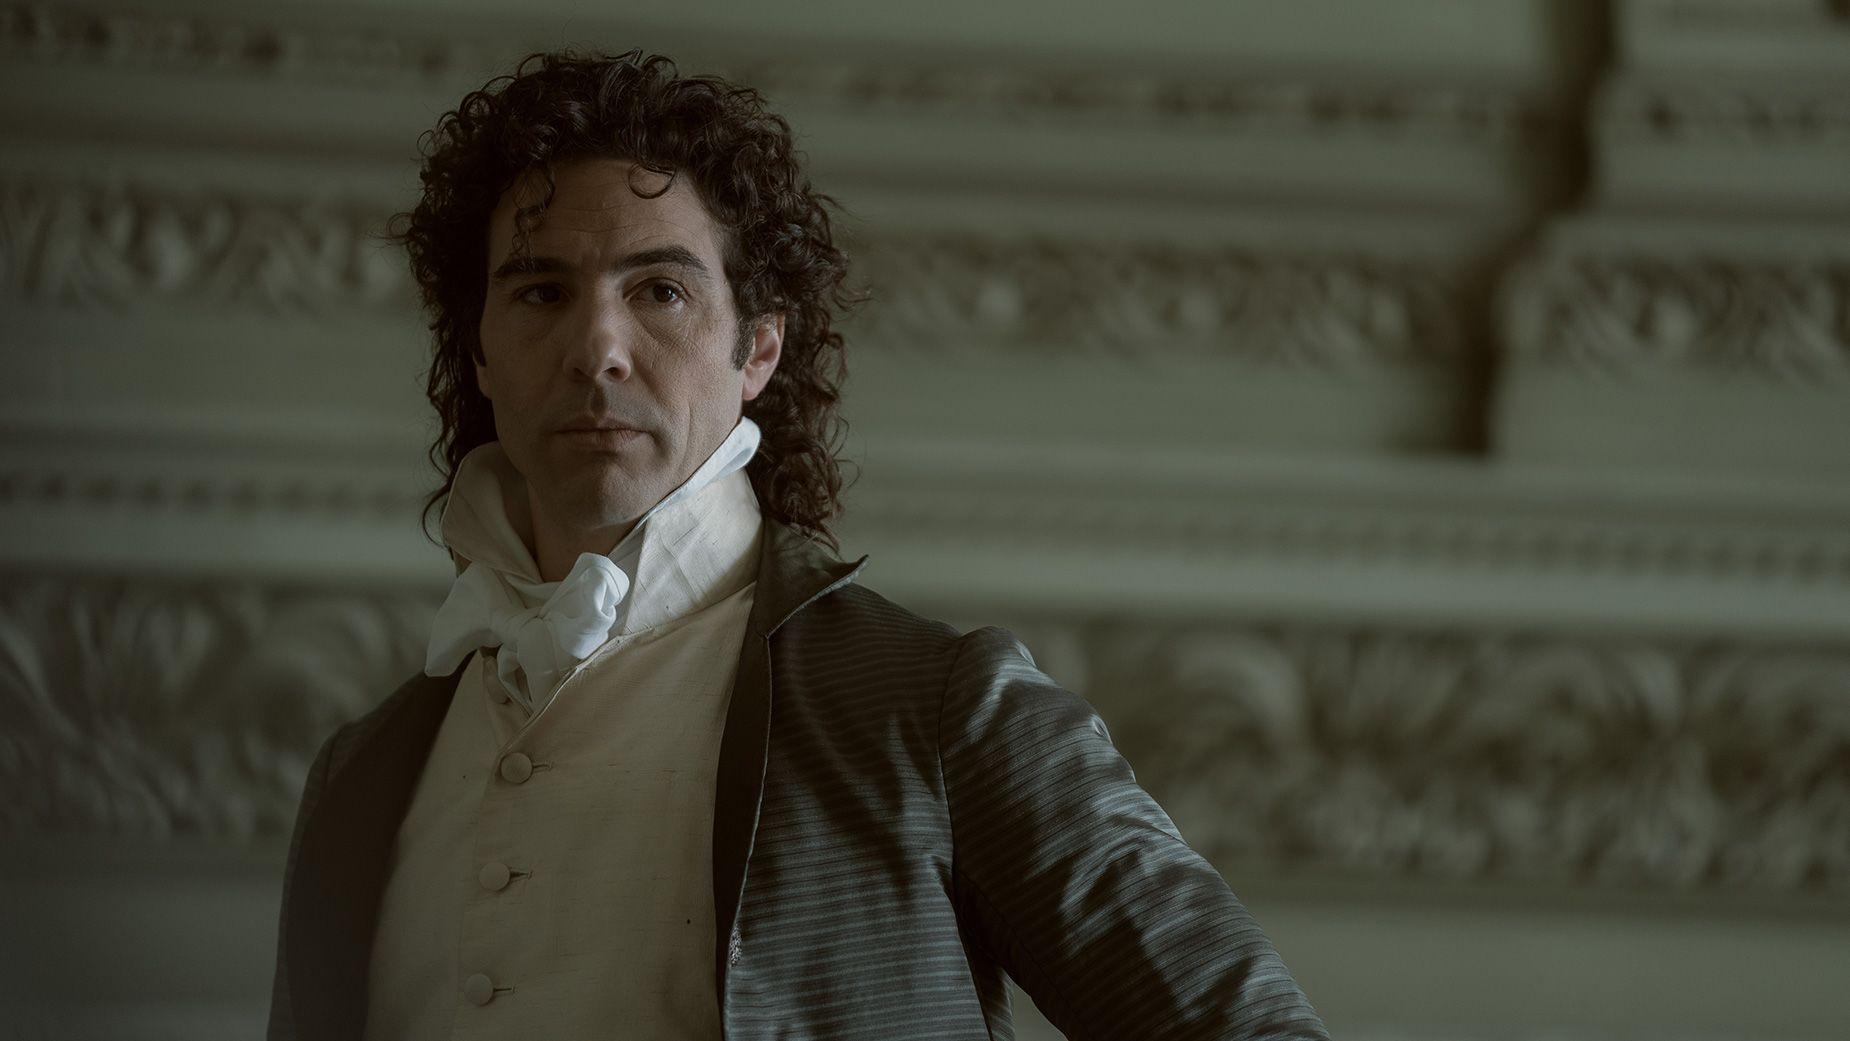 Paul Barras (played by Tahar Rahim) sports a luxurious curly mullet 